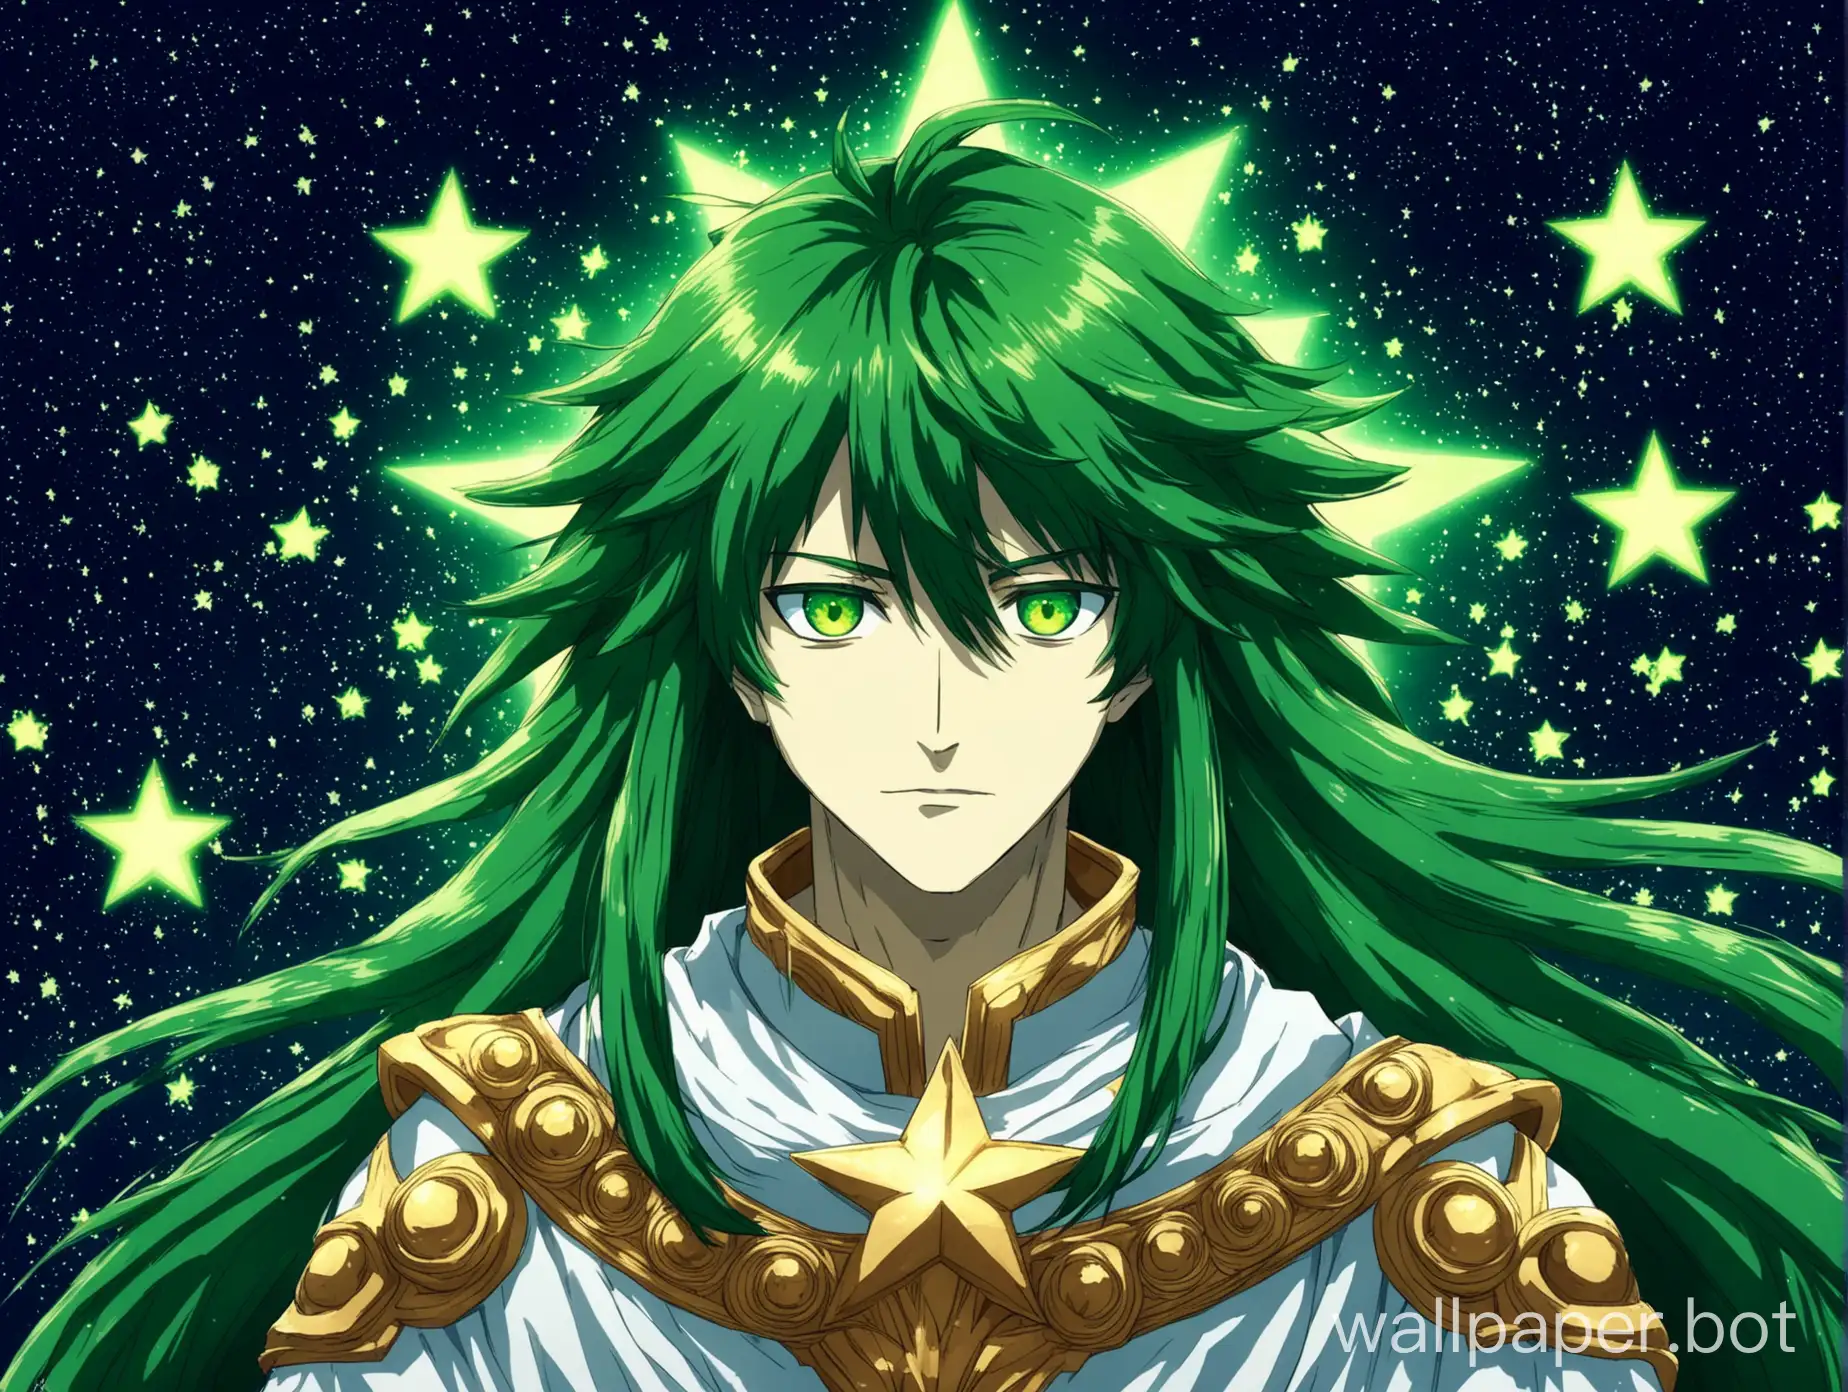 create a wallpaper 1920x1080 of an anime-style god with stars in the background, face should be fine with green eyes and long green hair